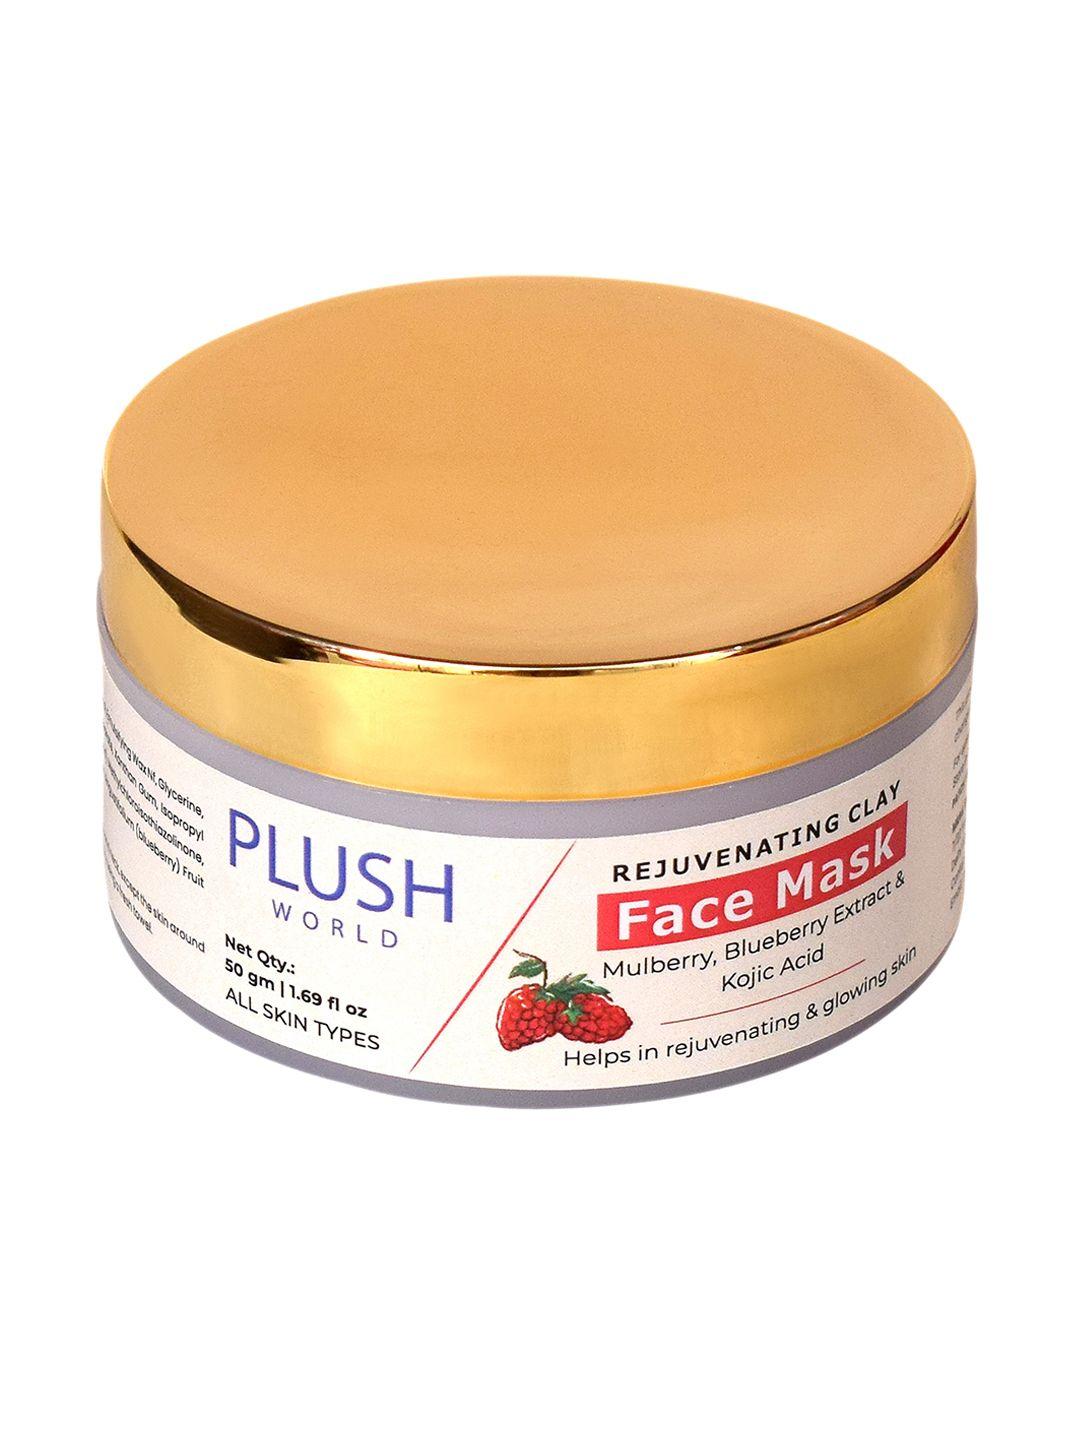 plush world rejuvenating clay face mask with mulberry & blueberry extract - 50 g